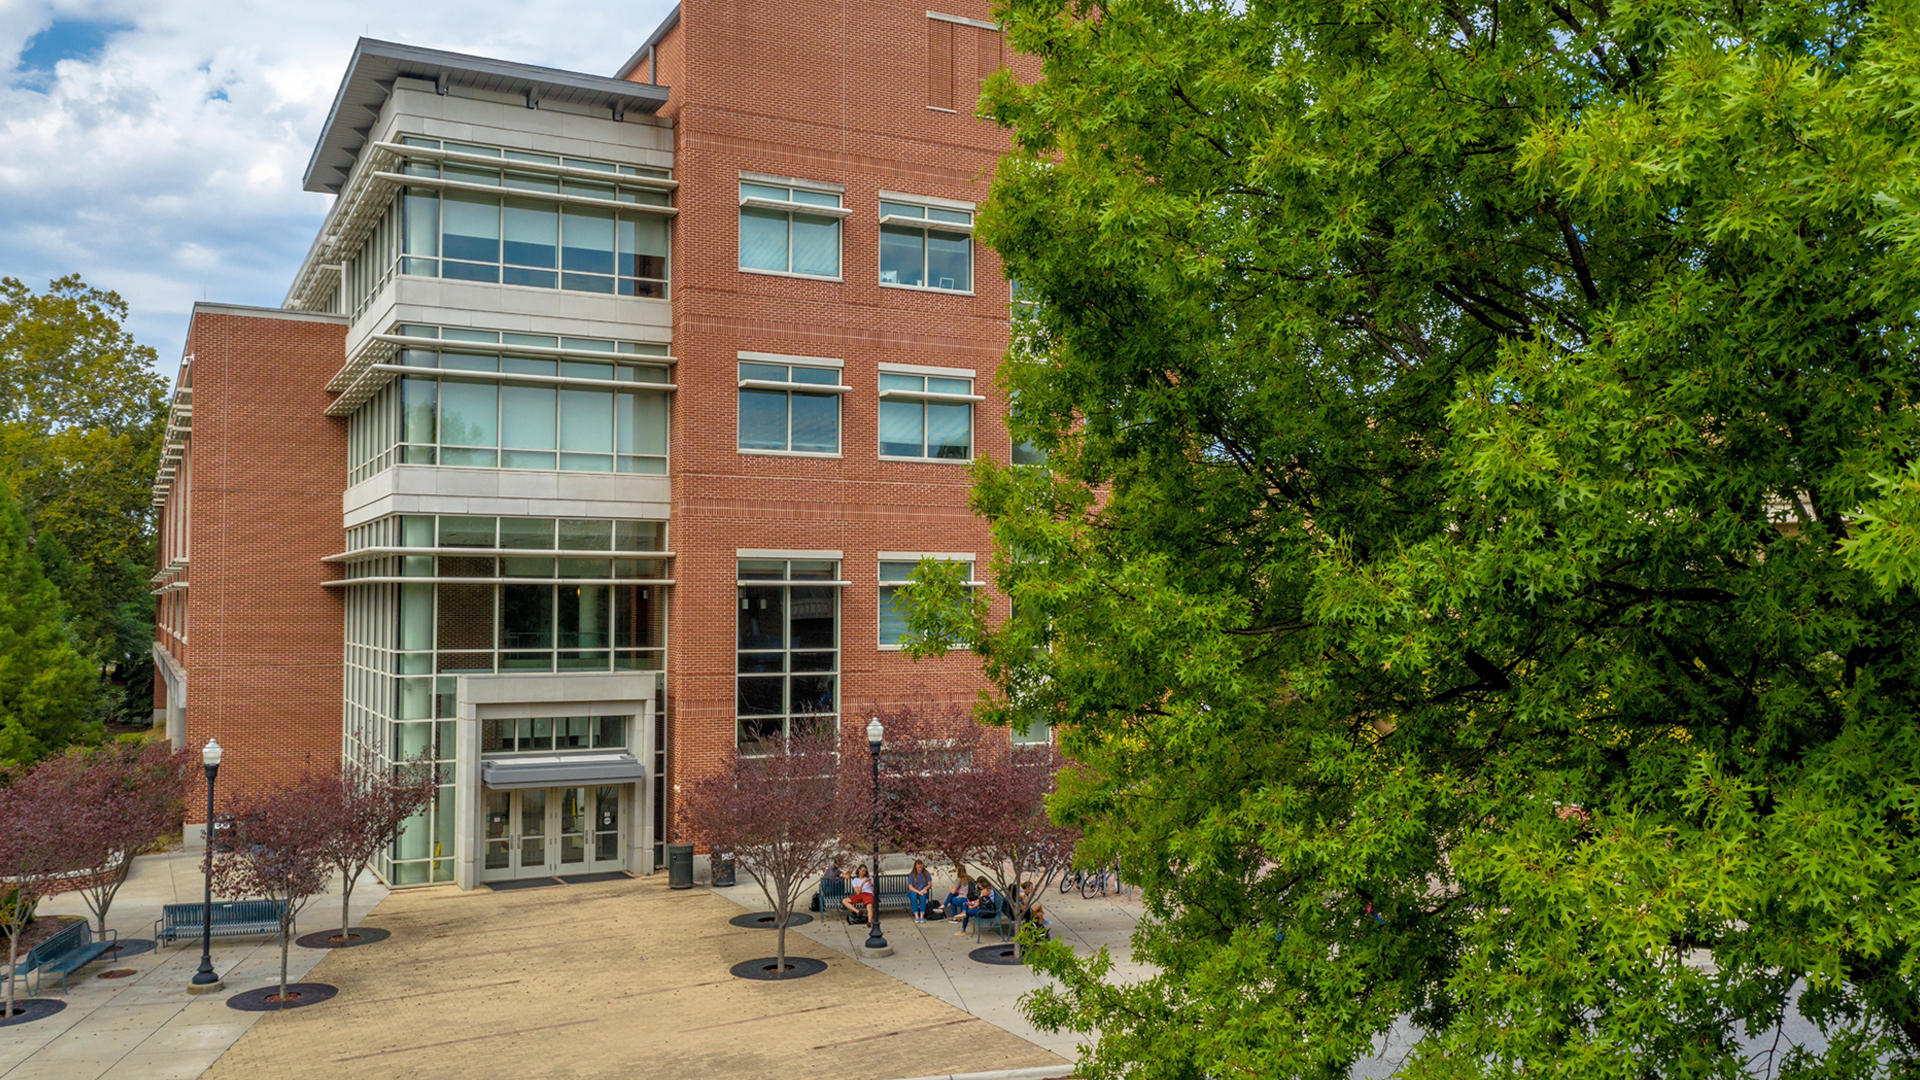 Aerial photo of the UNCG School of Education Building